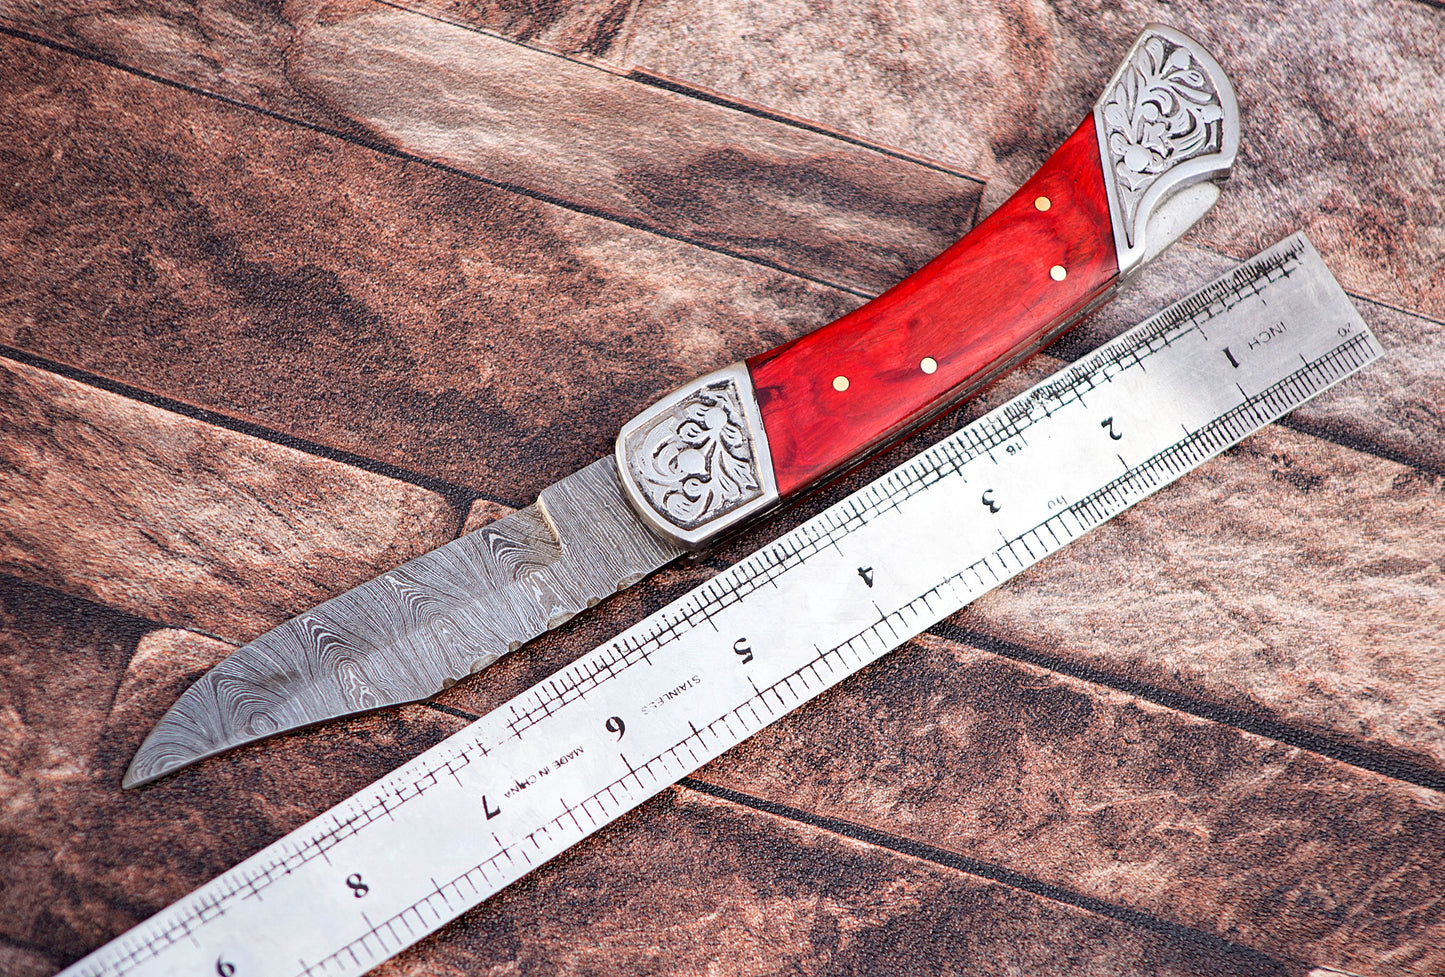 9" long back lock Folding Knife, Red wood Scale with Engraved steel bolster, custom made 4" Hand Forged Damascus steel blade, Cow hide leather sheath with belt loop